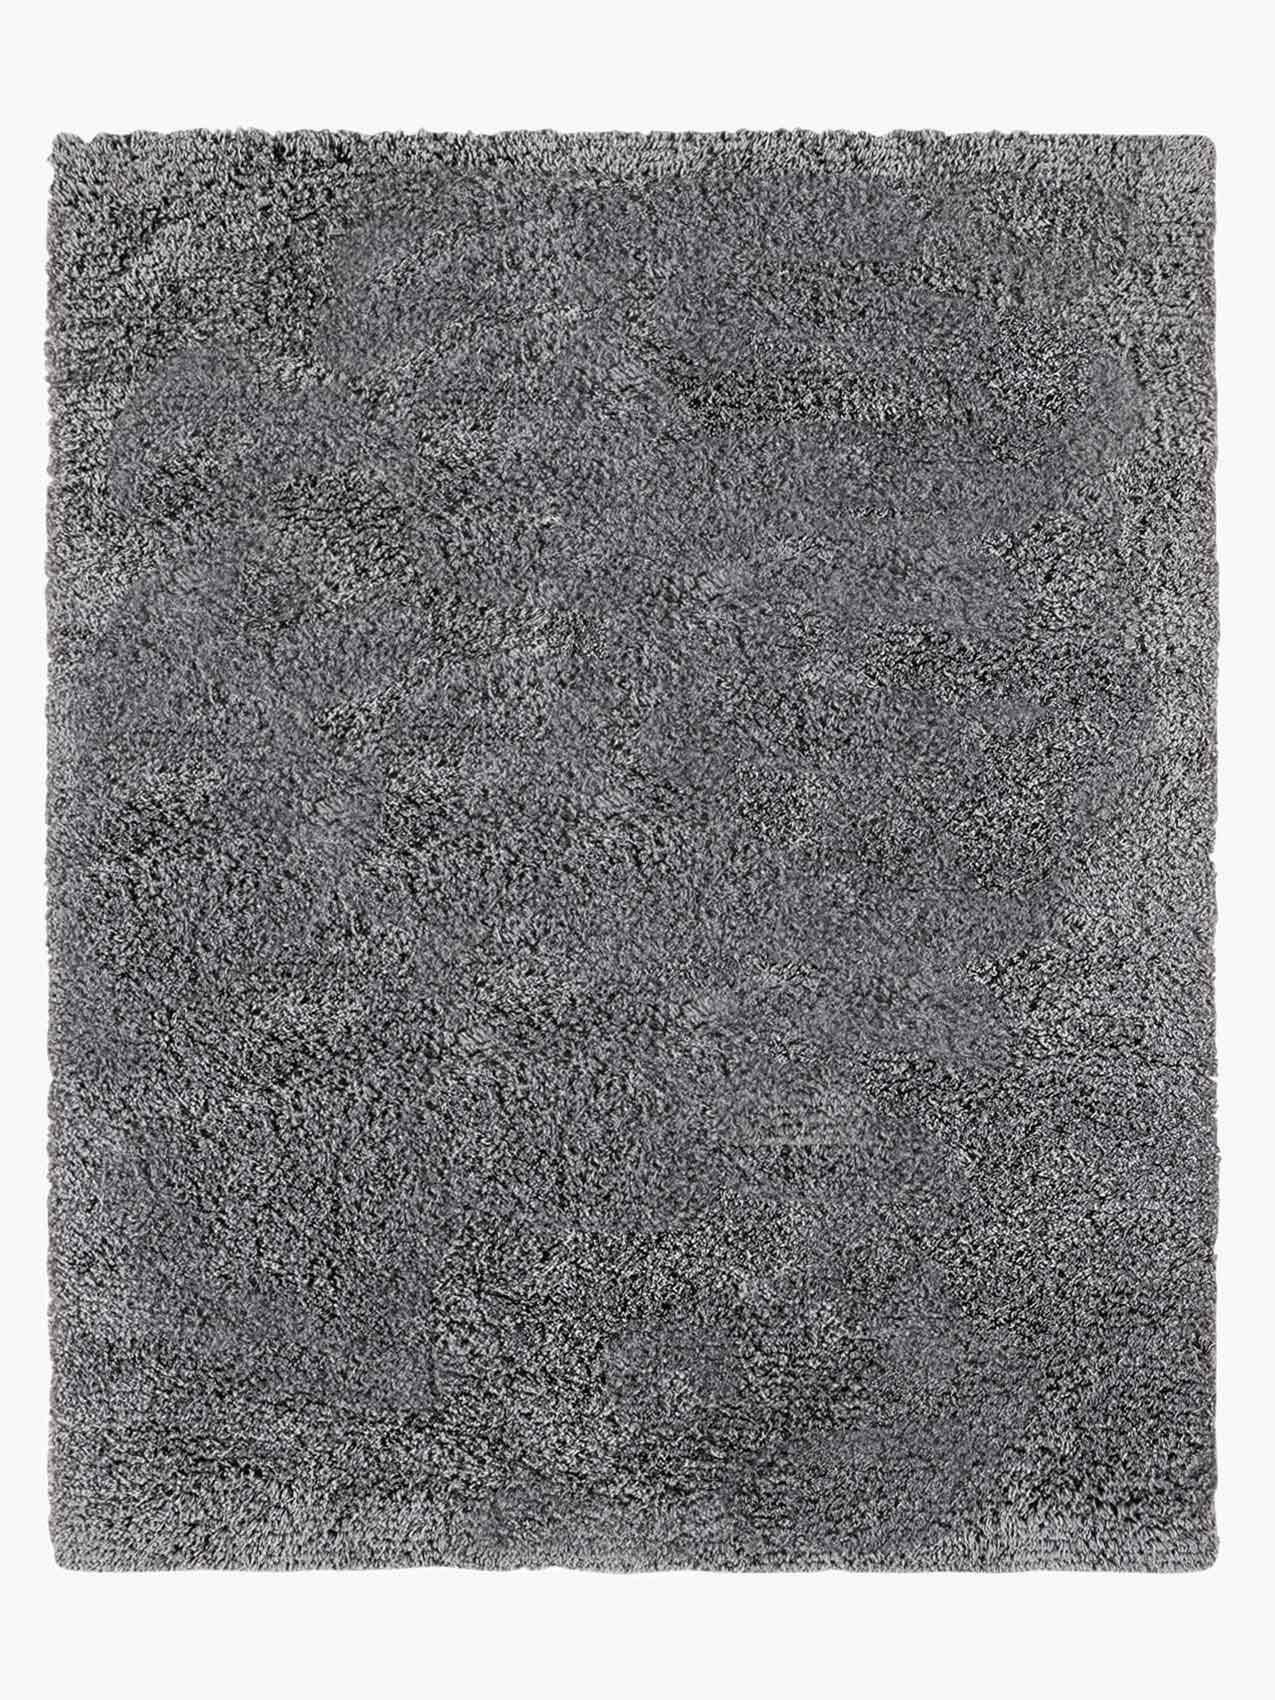 For Sale: Gray (Nickel/Carbon) Ben Soleimani Performance Shag Rug– Hand-woven Ultra-plush 9'x12'